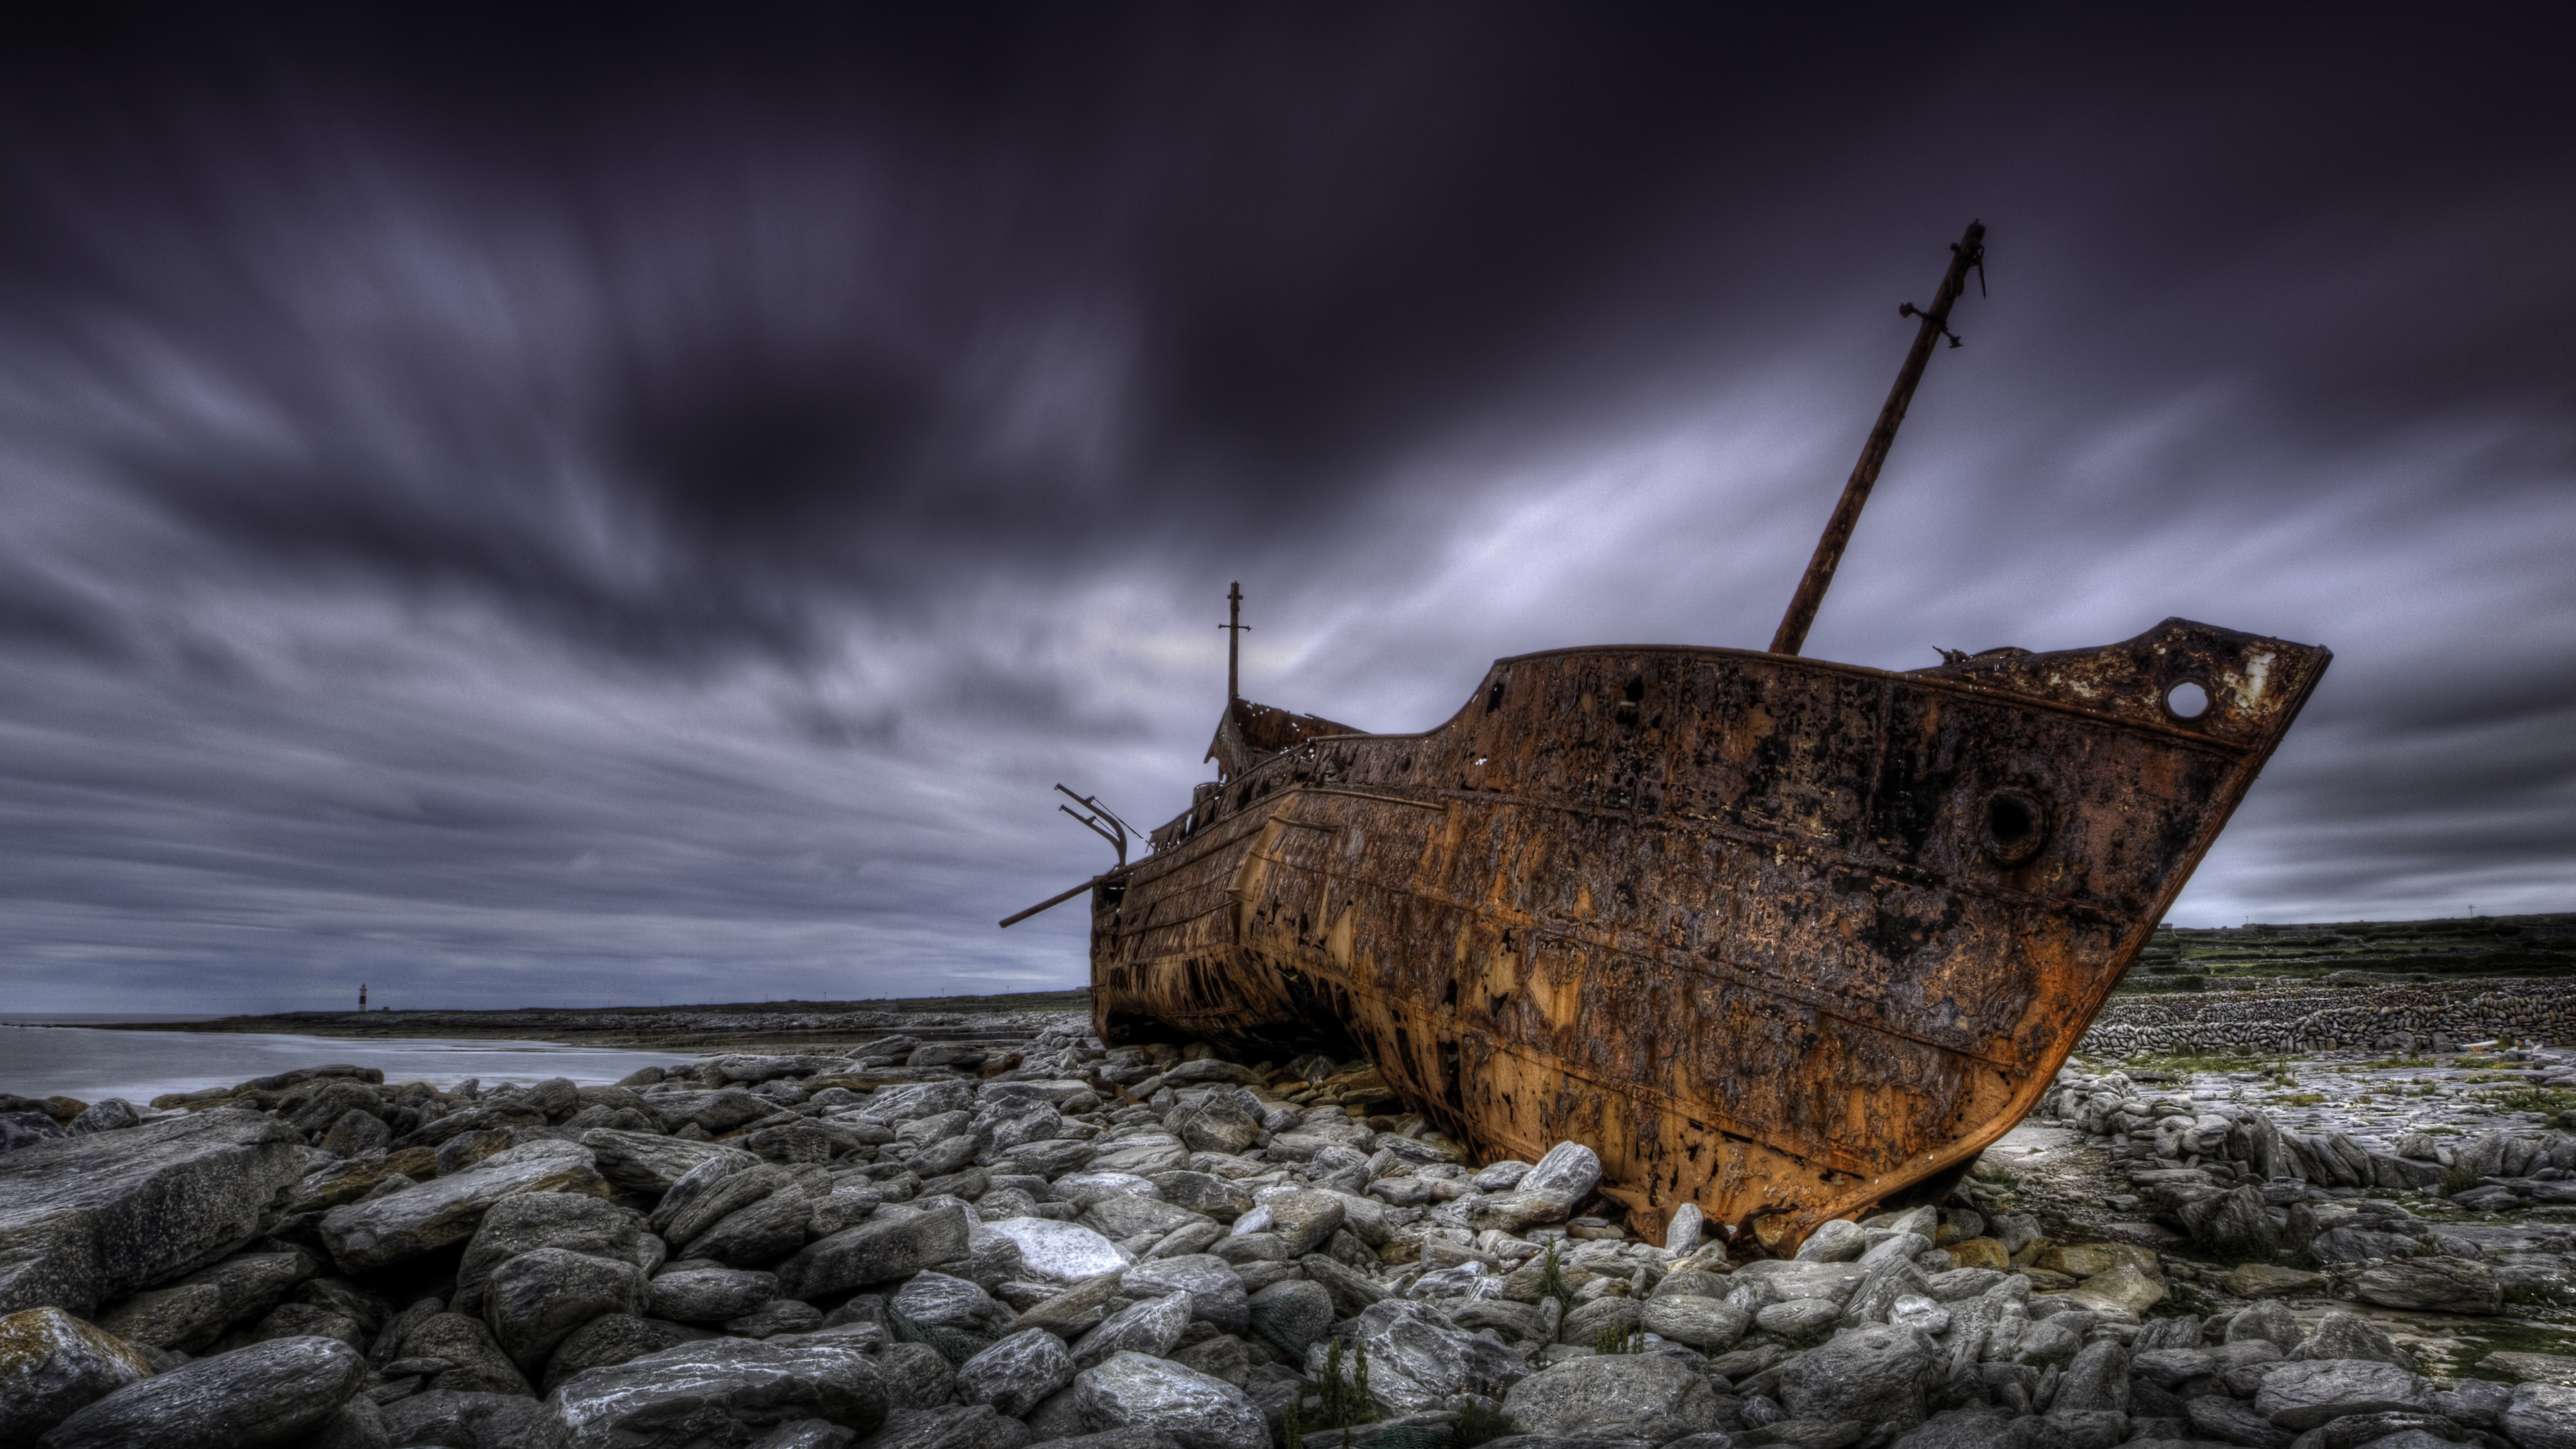 General 3840x2160 ship vehicle shipwreck rust old outdoors